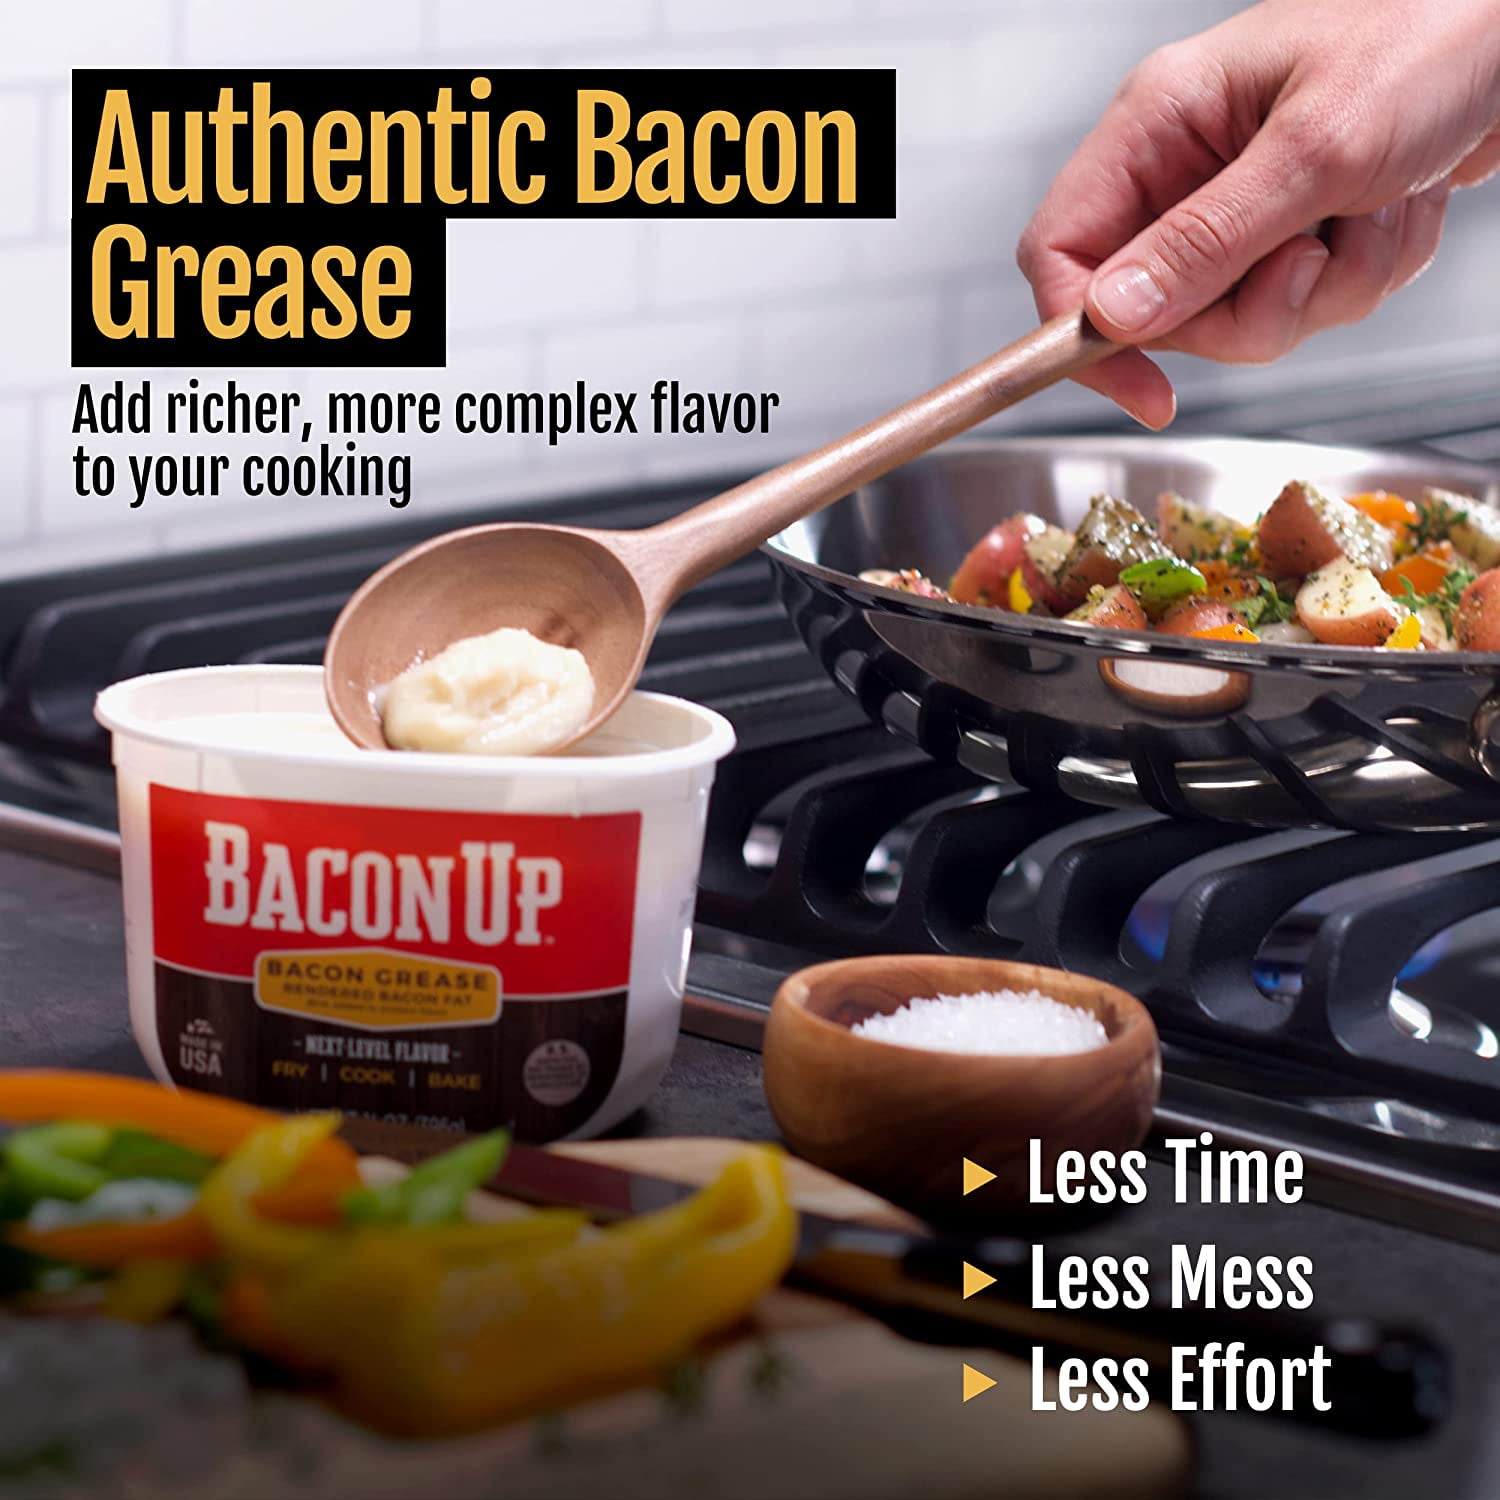 Better N Bacon LLC, distributors of Bacon Up bacon grease